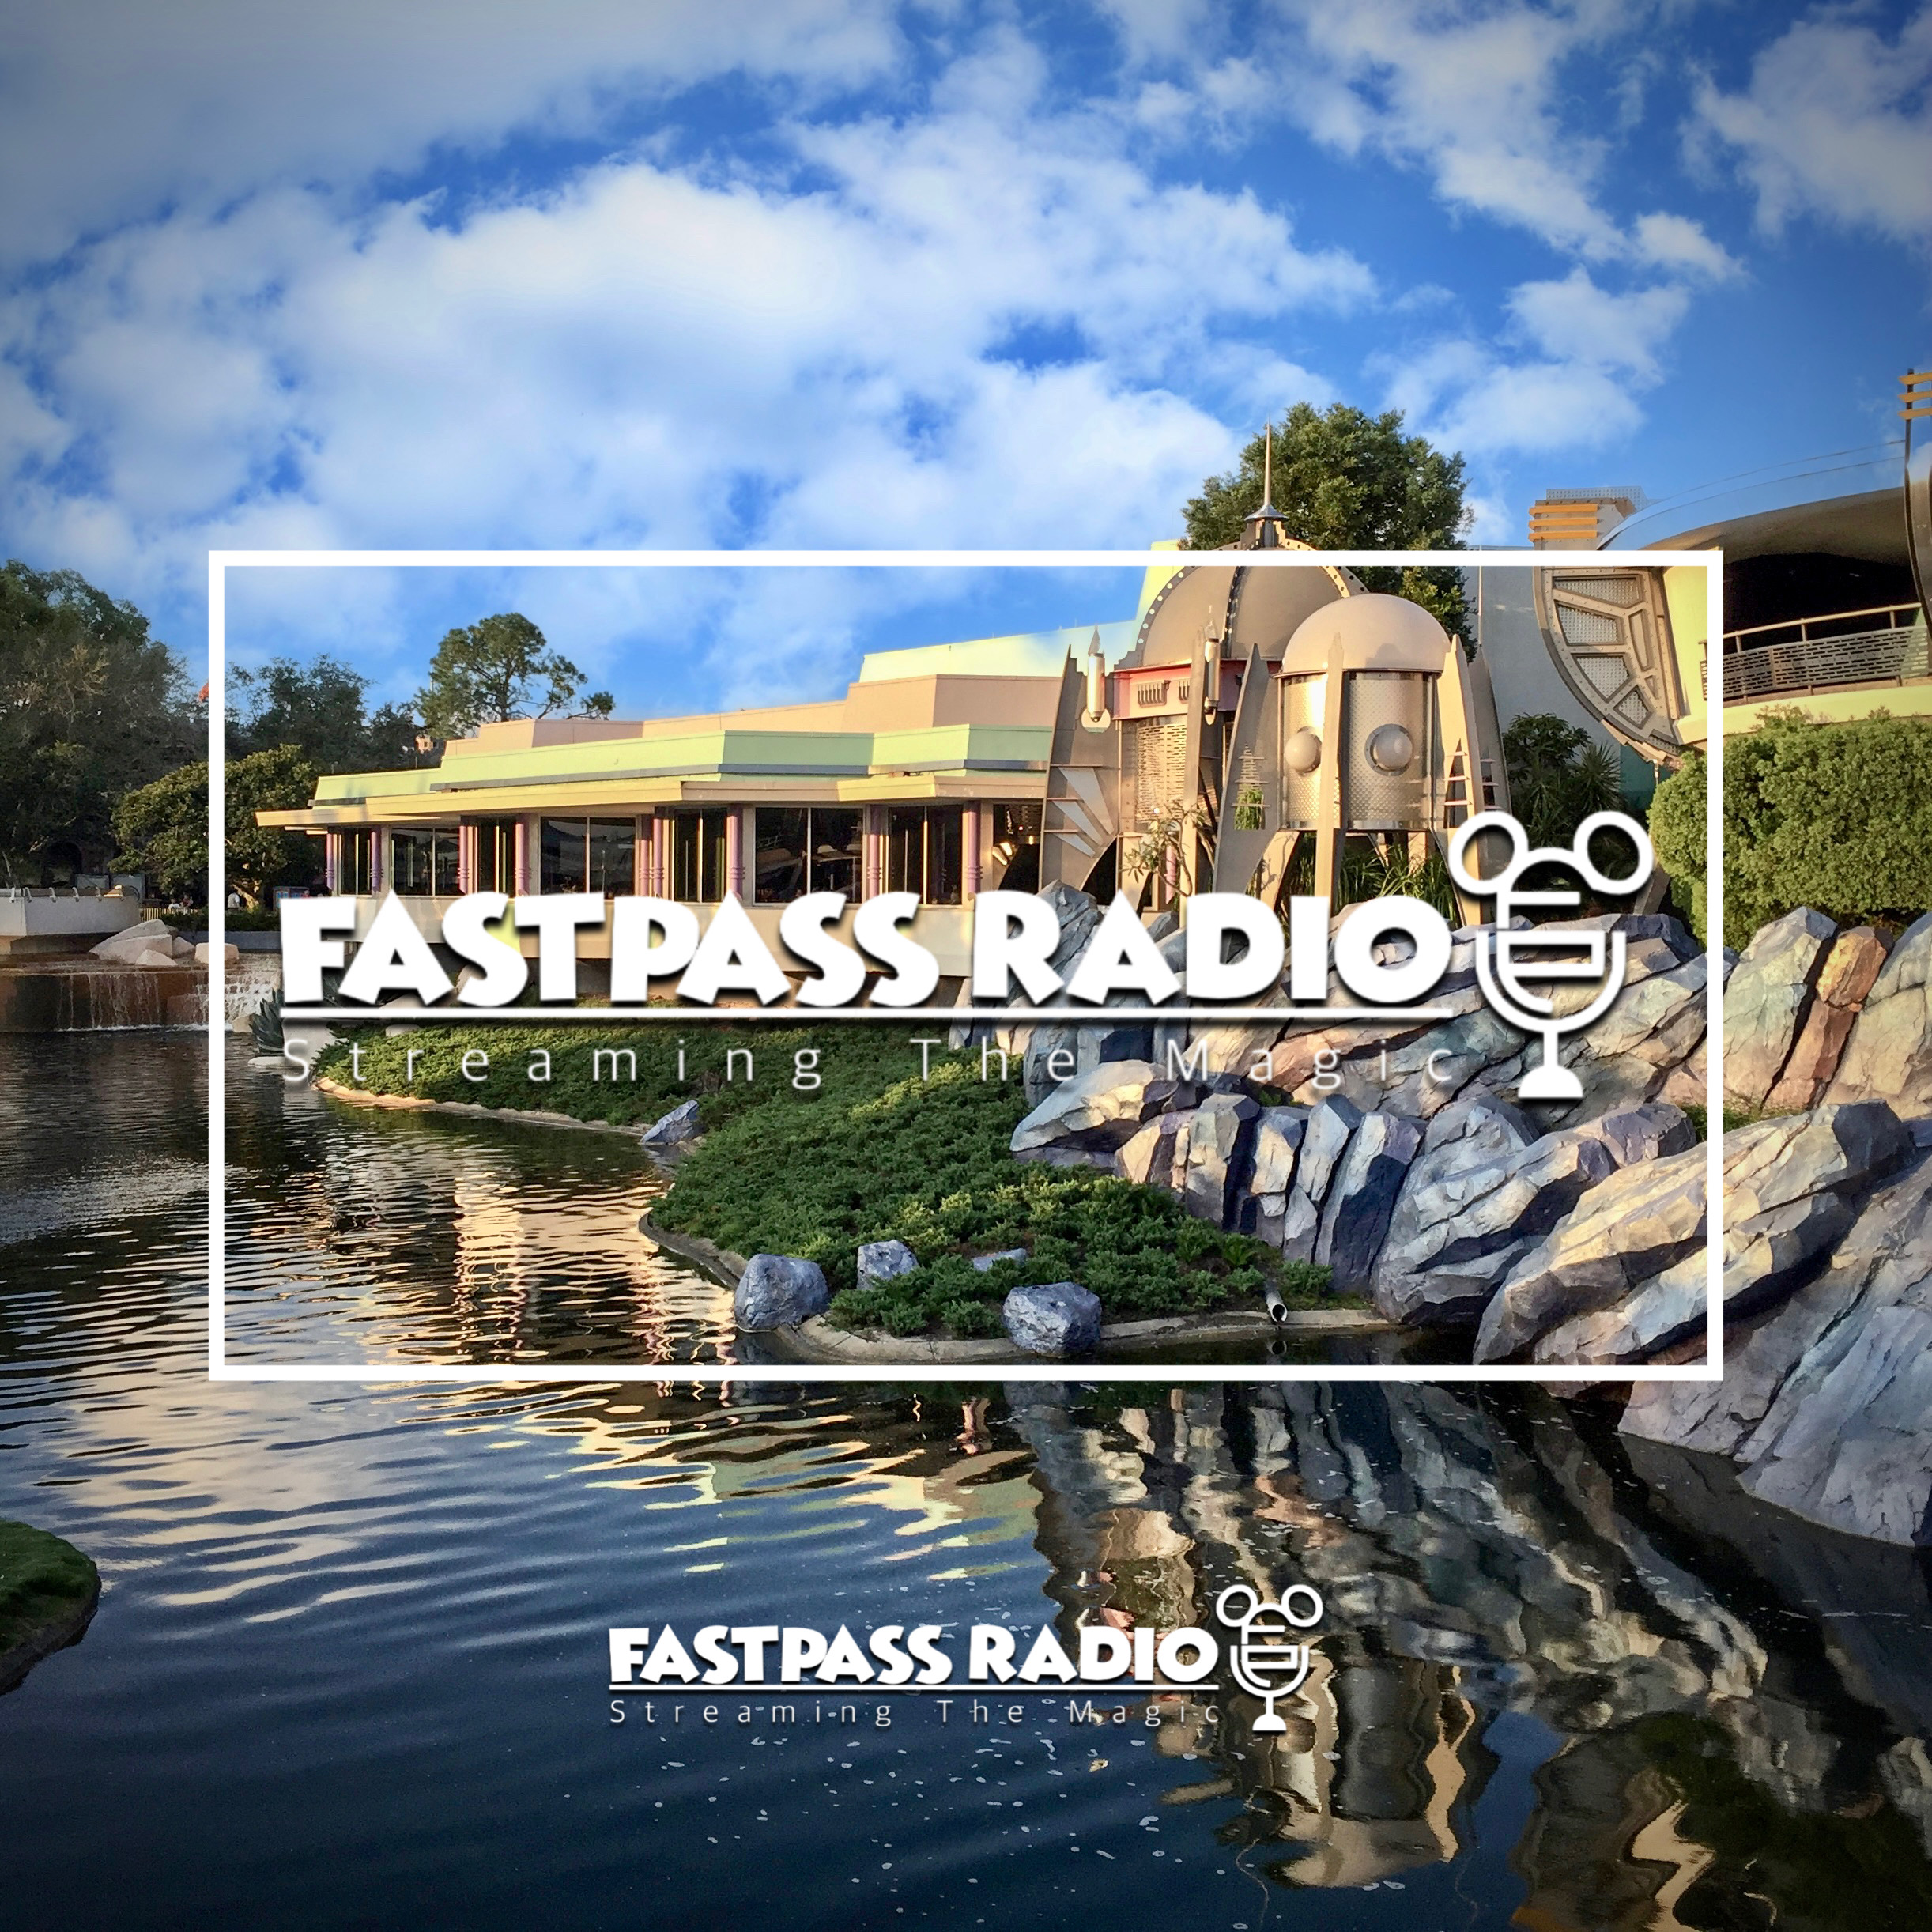 Art for This is Fastpass Radio by Fastpass Radio